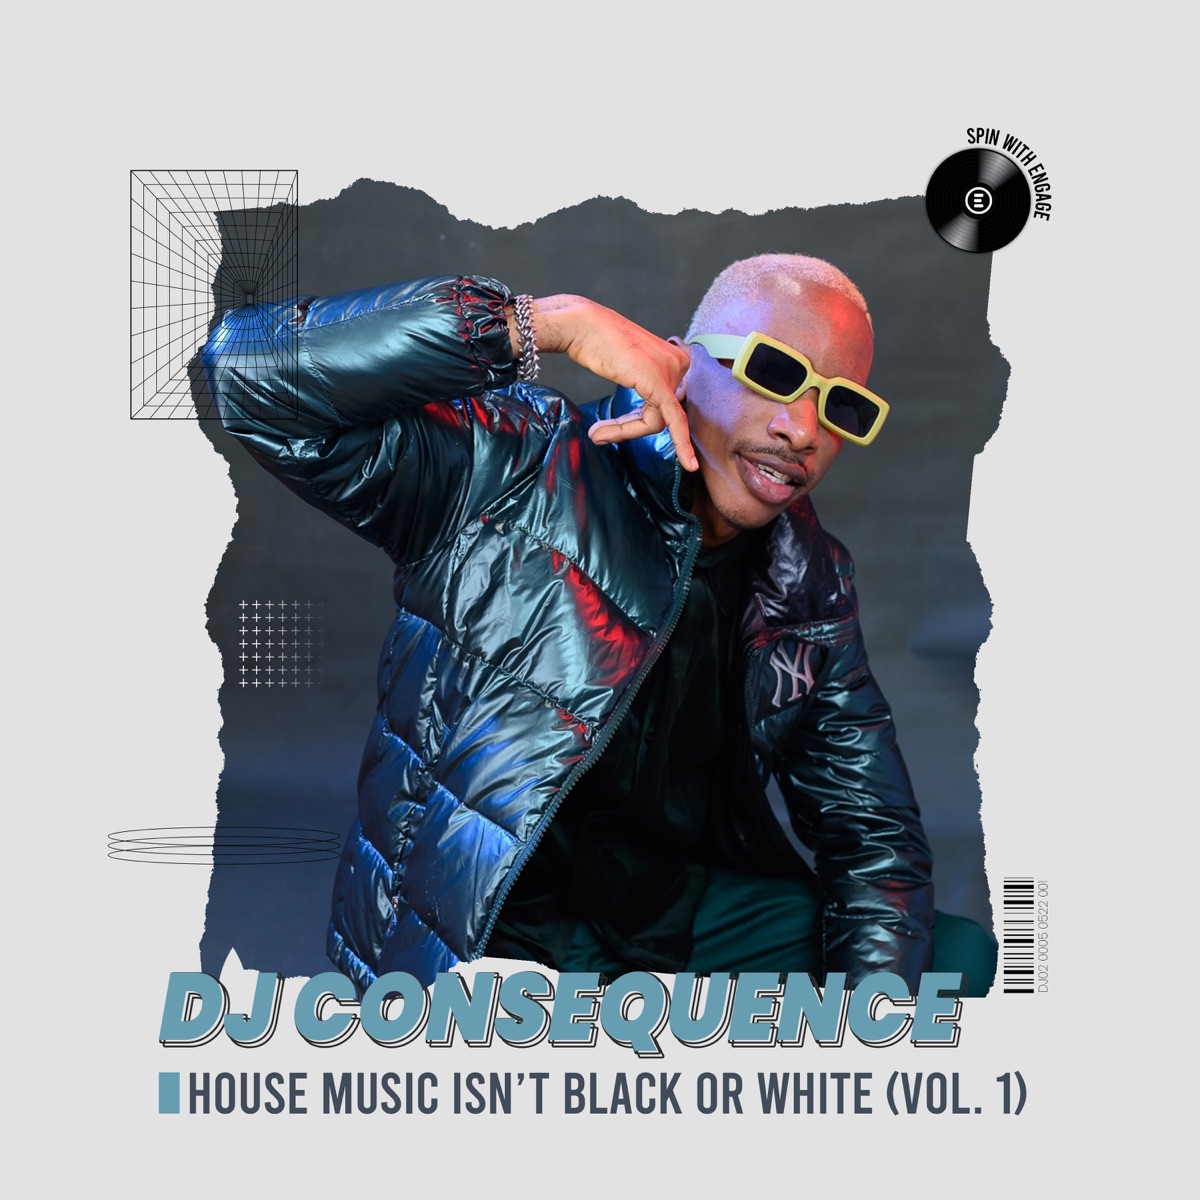 House Music Isn't Black or White, Vol. 1 (DJ Mix) - Album by Dj Consequence  - Apple Music